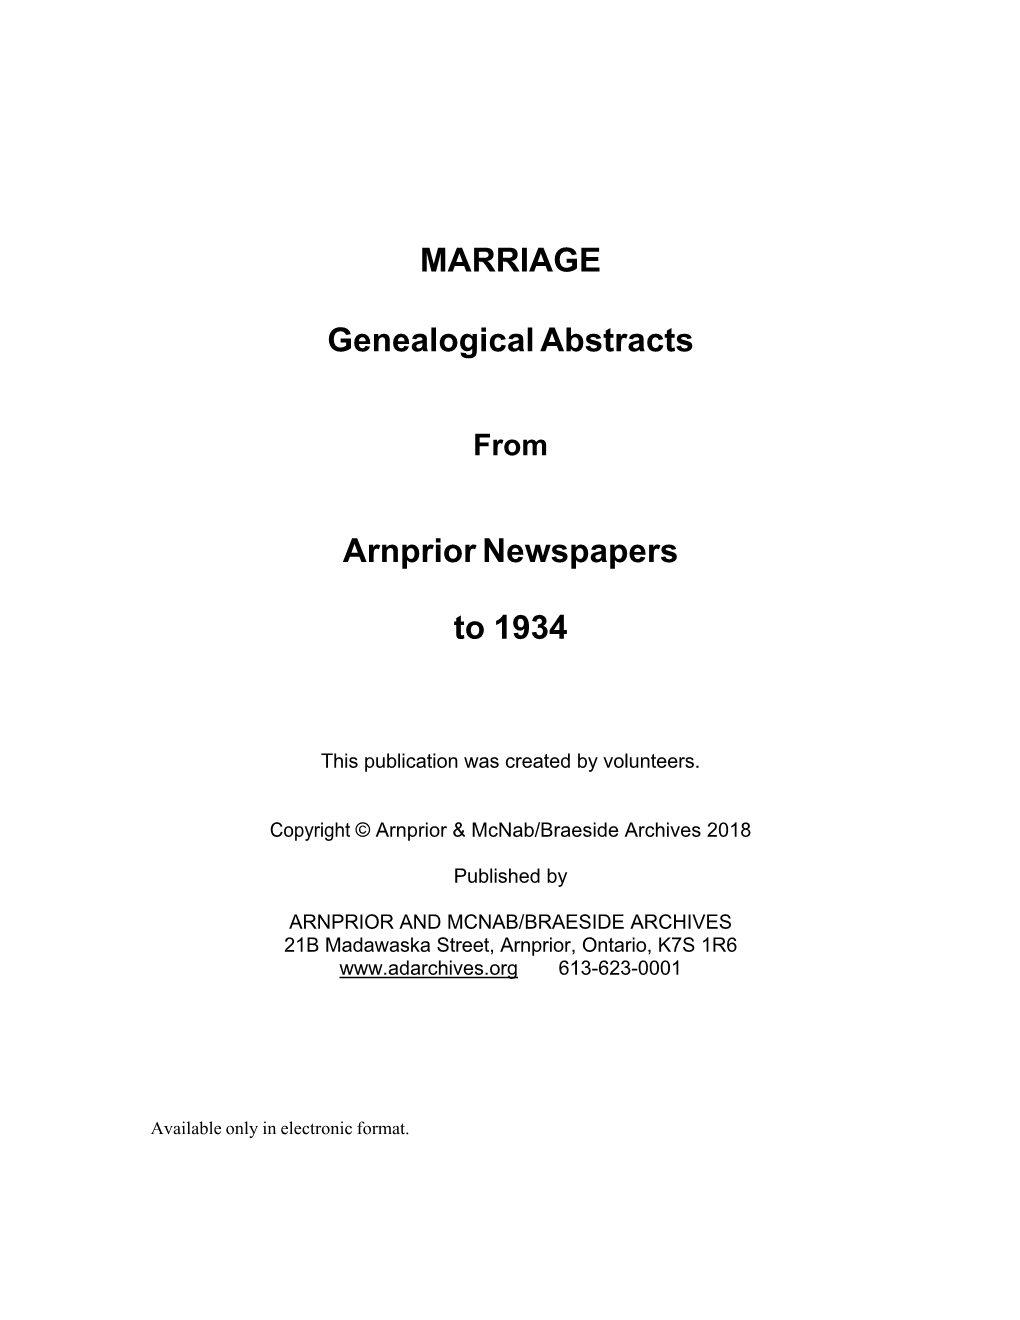 MARRIAGE Genealogical Abstracts Arnprior Newspapers to 1934